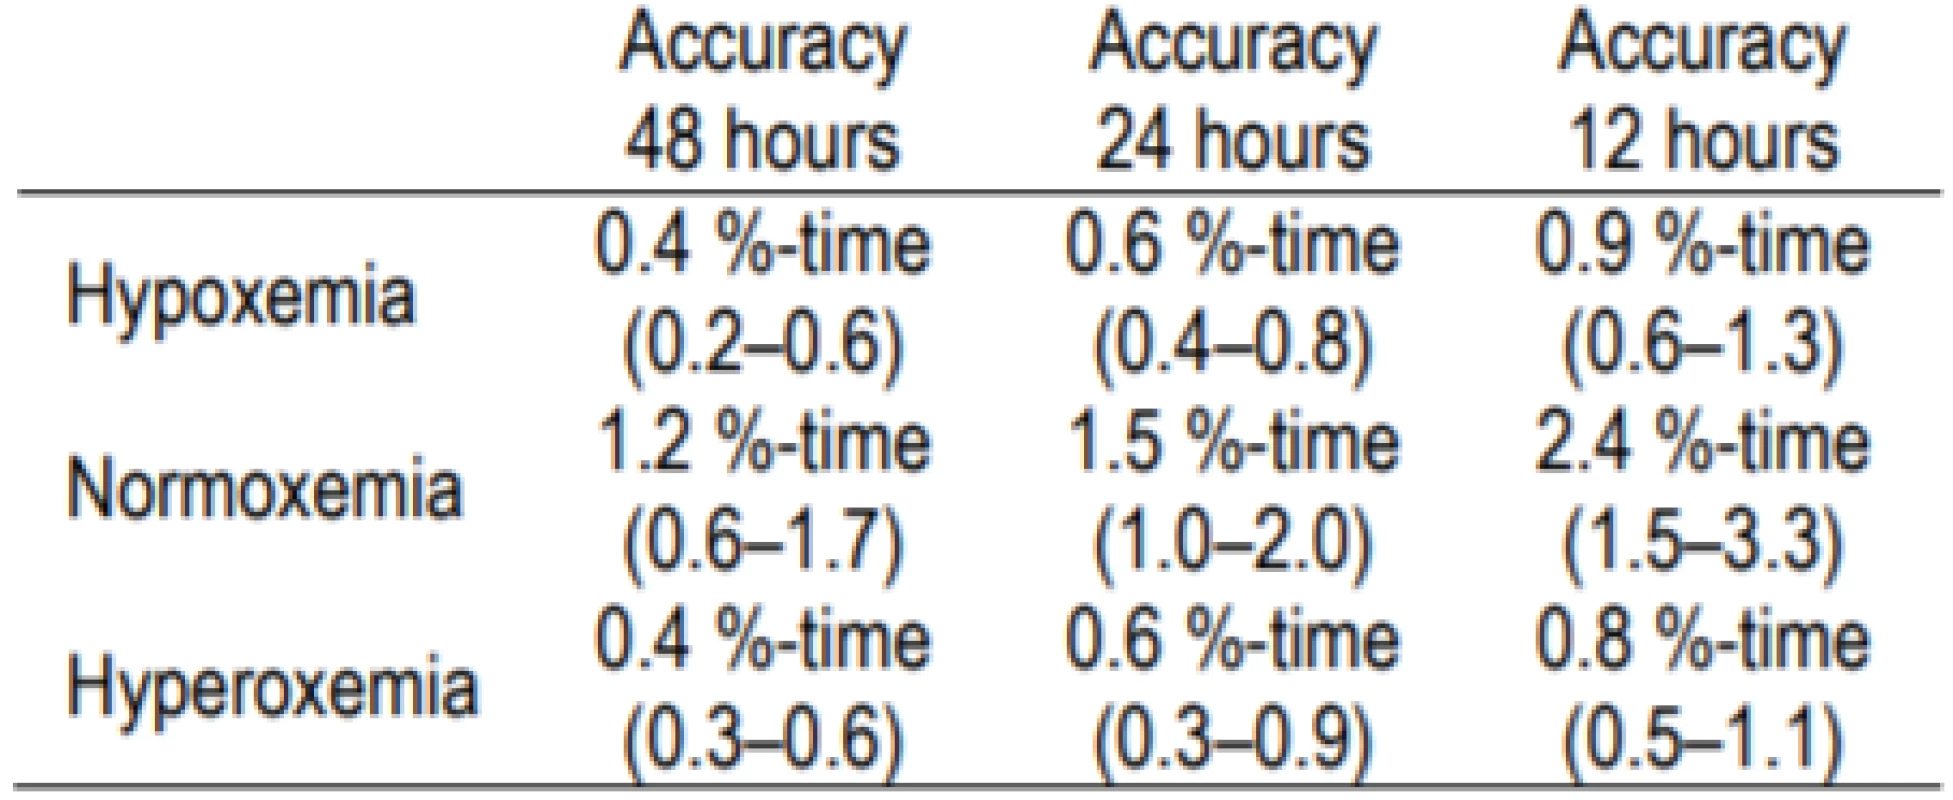 Accuracy for 120-second Sampling with
48-hour, 24-hour and 12-hour Epochs.